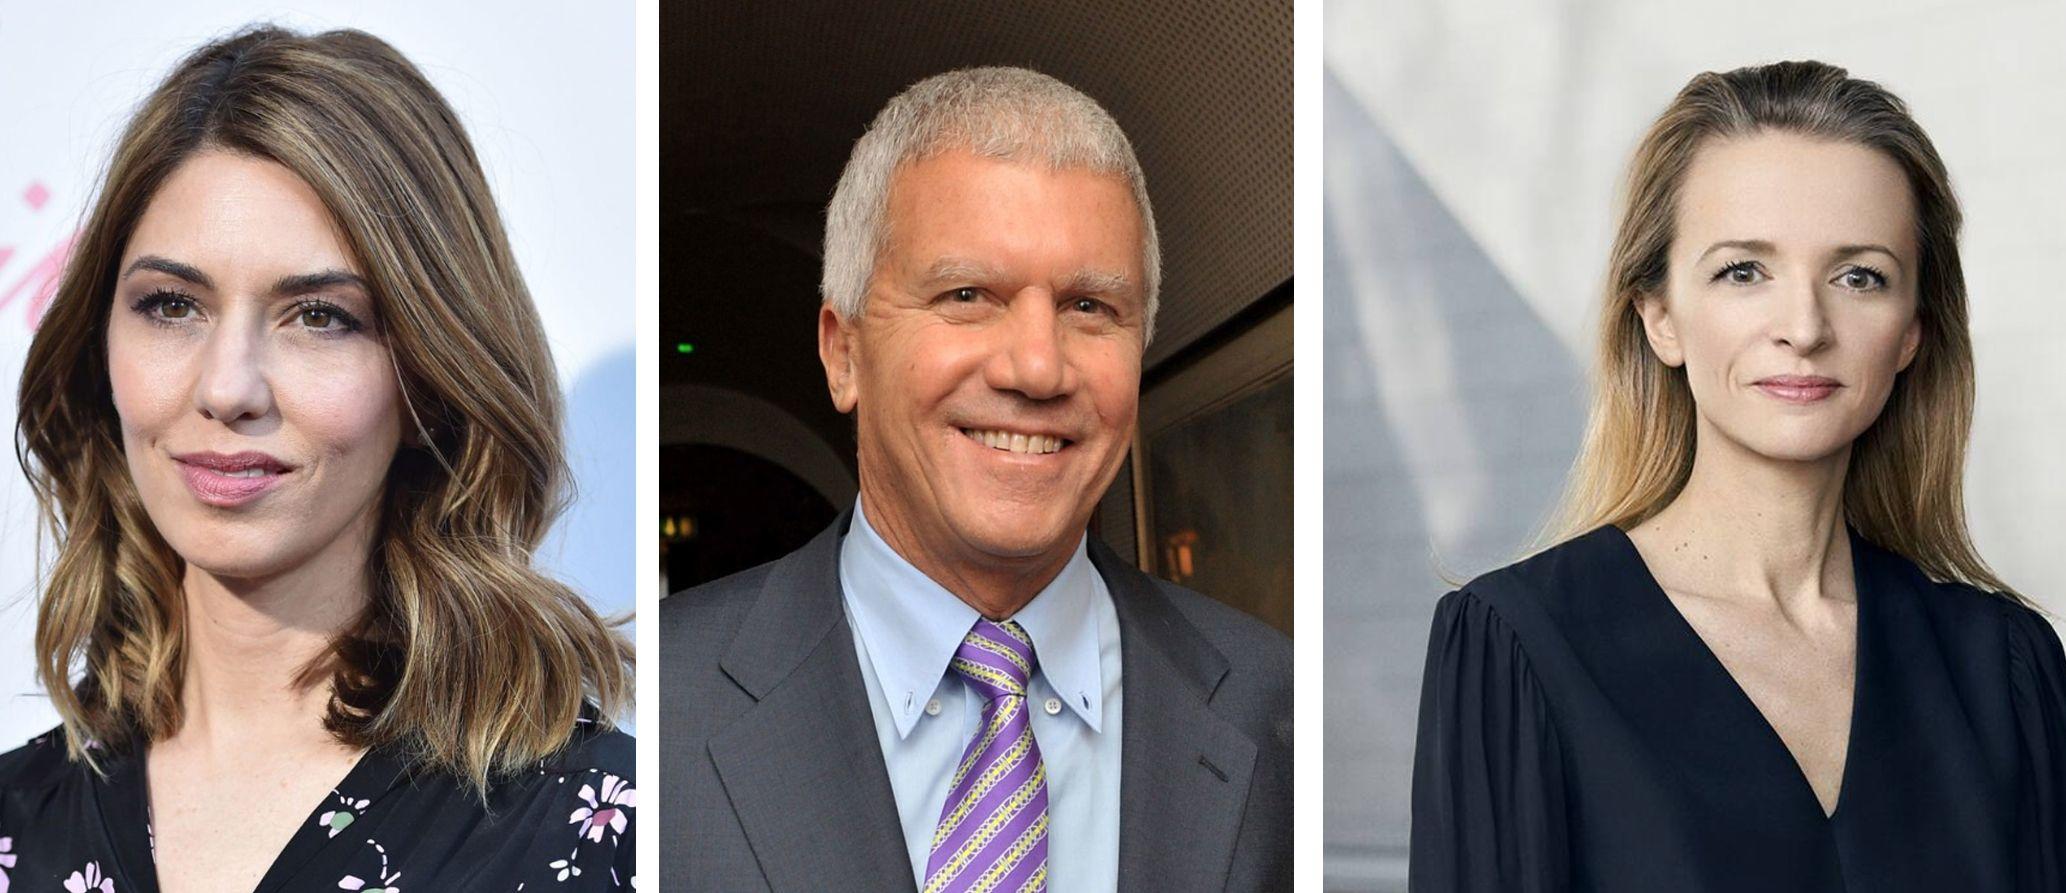 What Do a Filmmaker, Hedge Fund Manager, and Tech Company Founder Have in  Common? They Are All on Gagosian's Newly Formed Board of Directors